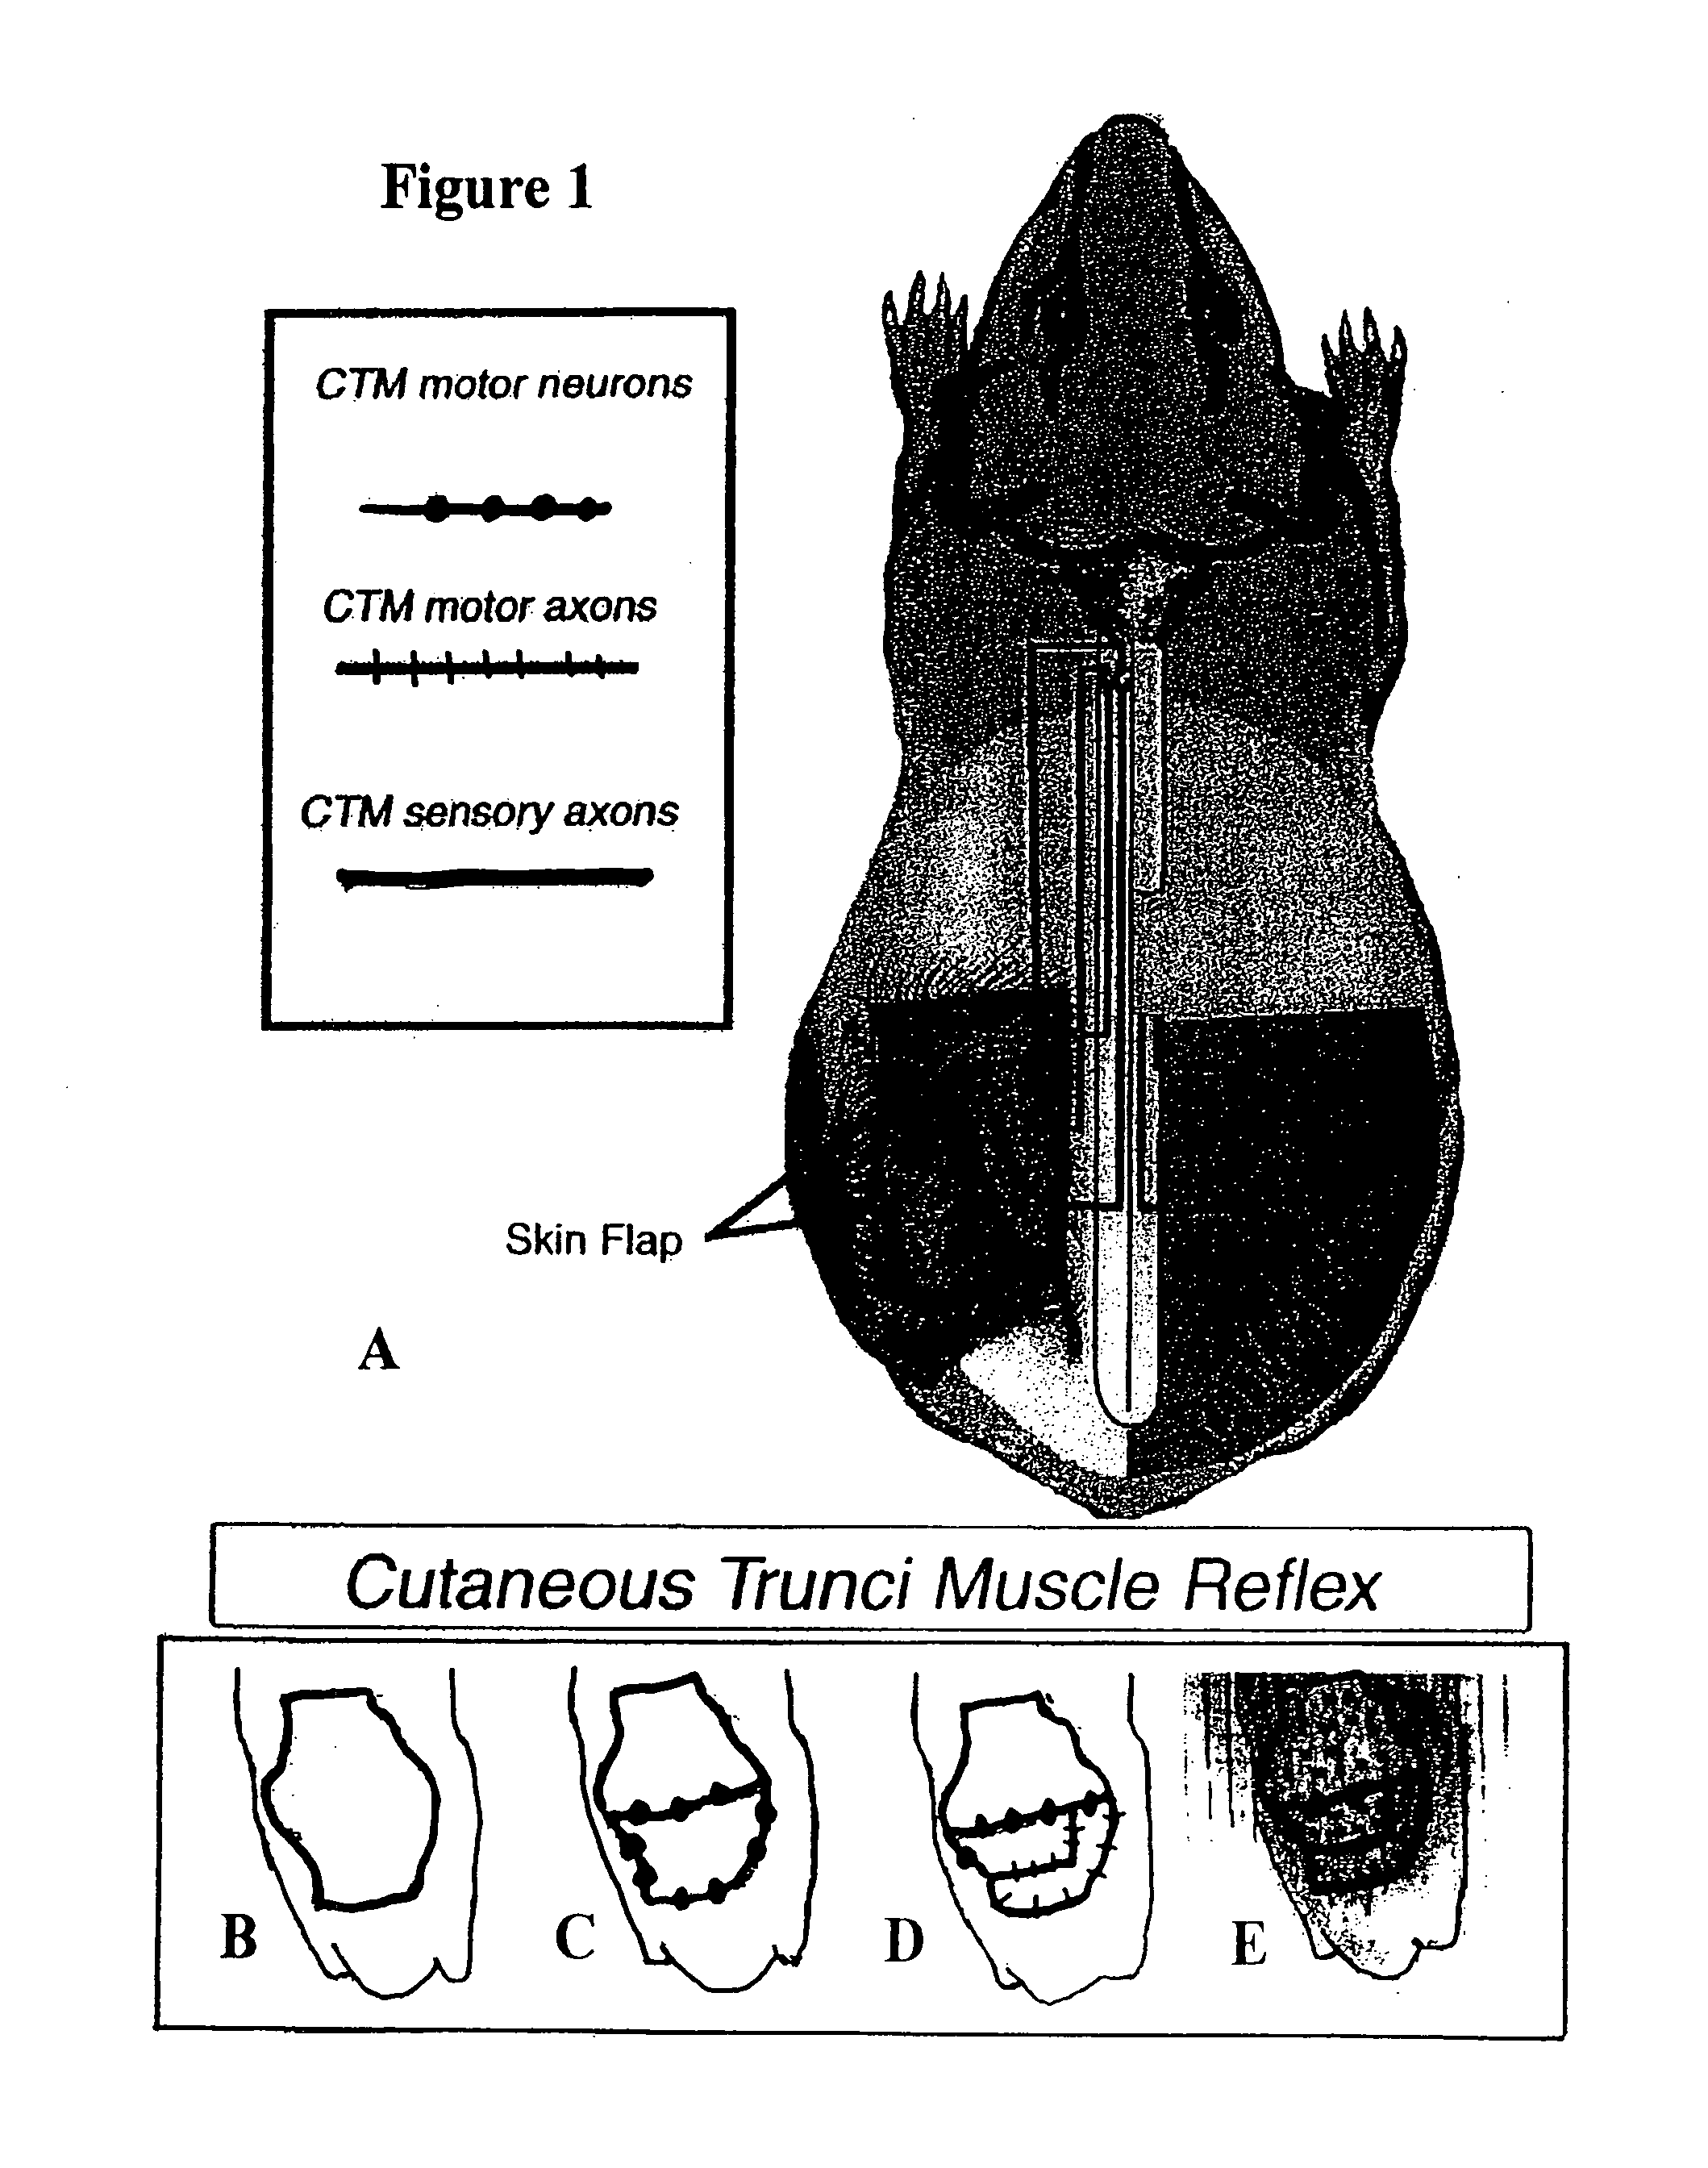 Method of treatment for central nervous system injury